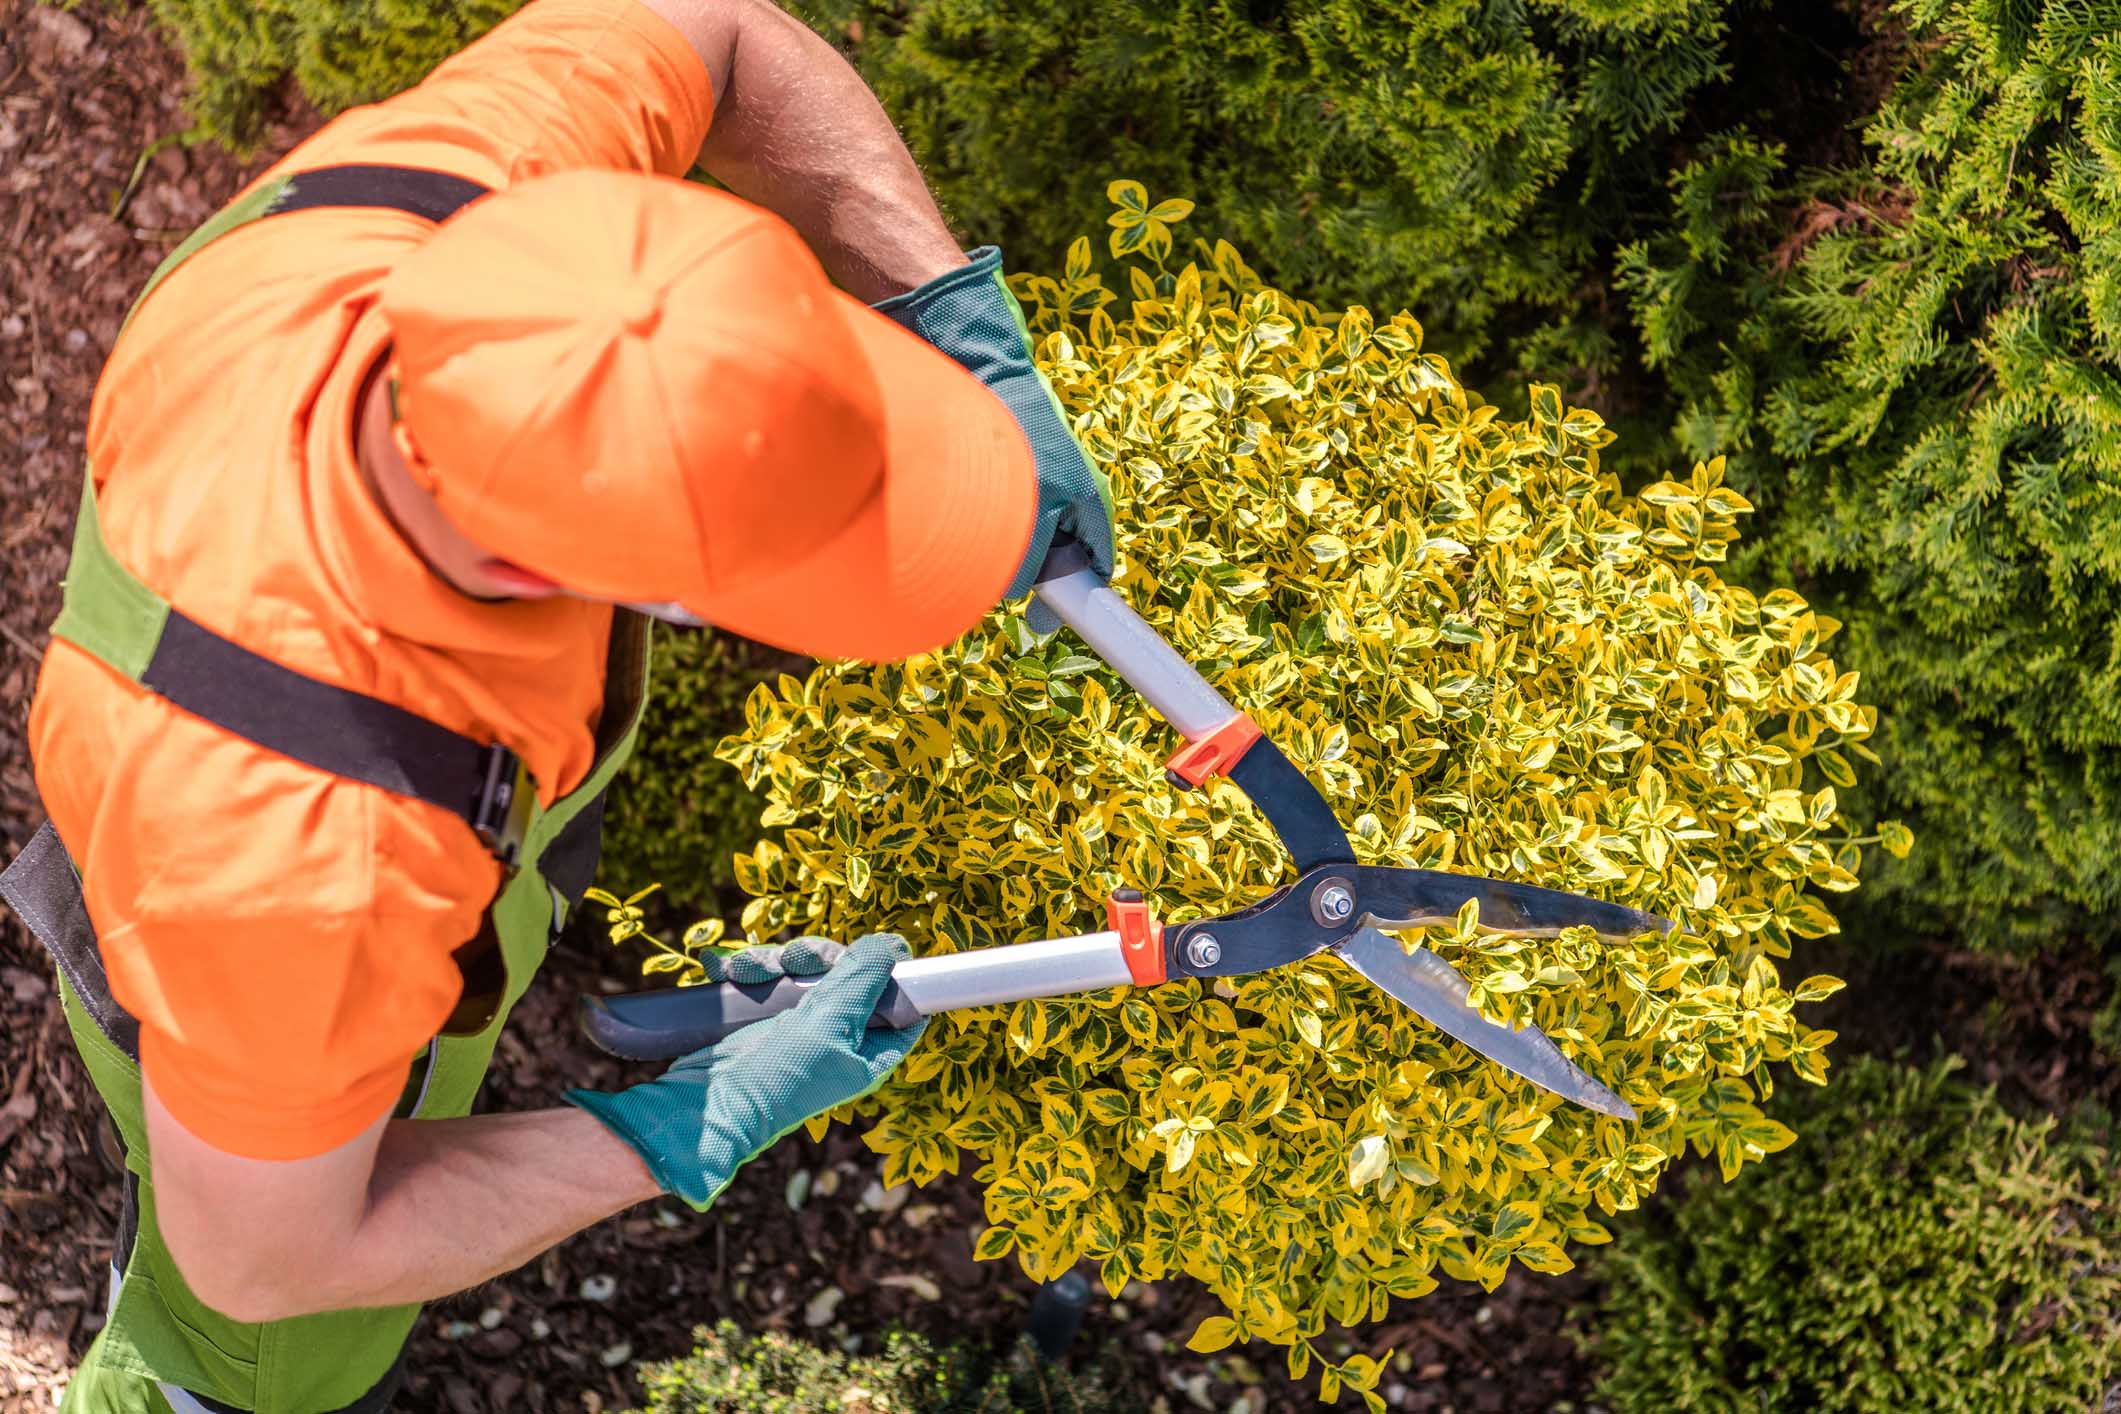 Professional landscaper trimming shrubs and bushes